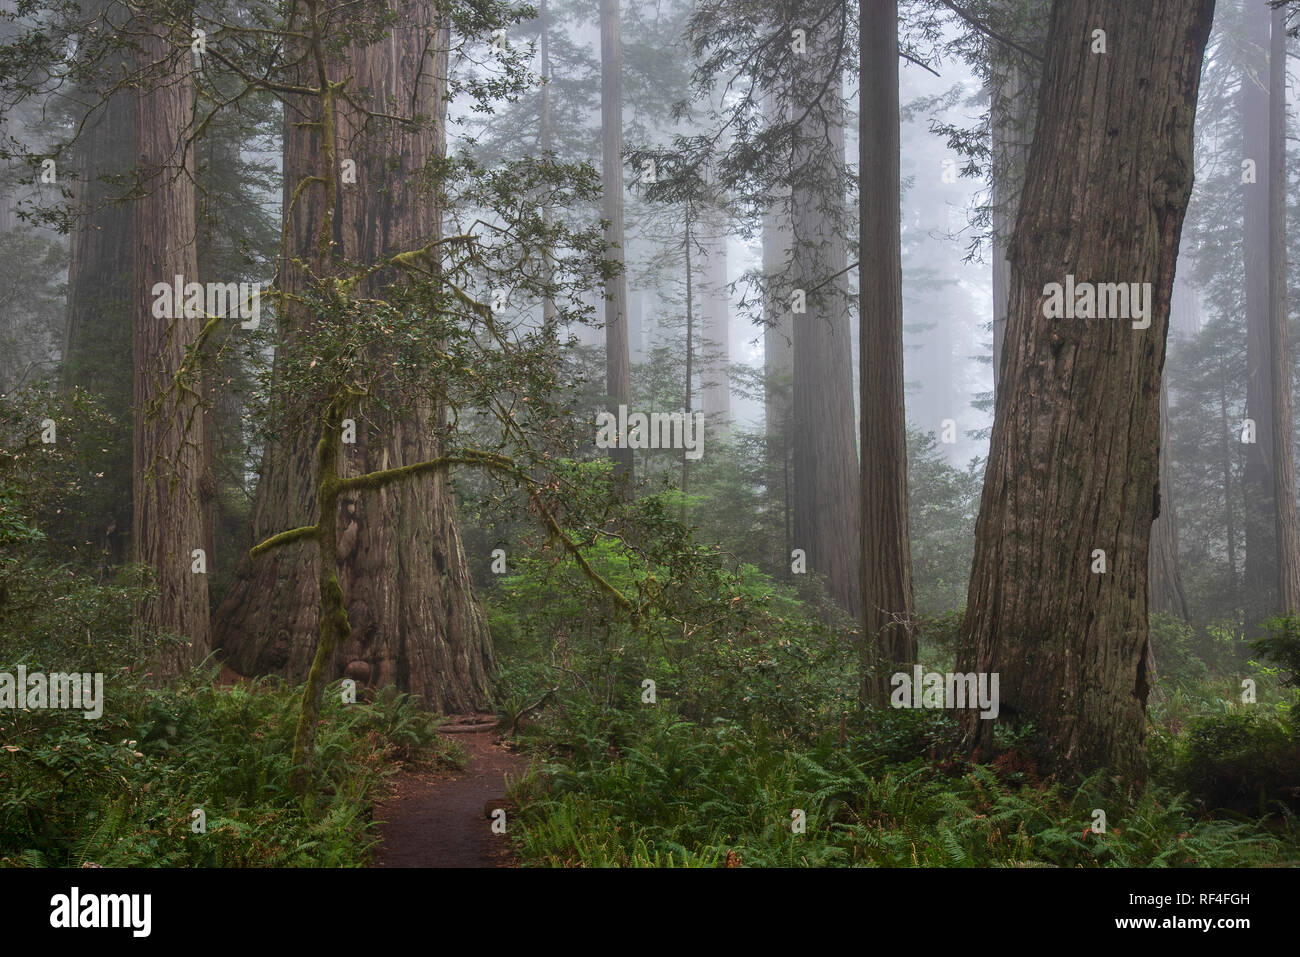 Redwood trees and fog in Lady Bird Johnson Grove, Redwoods National and State Parks, California. Stock Photo